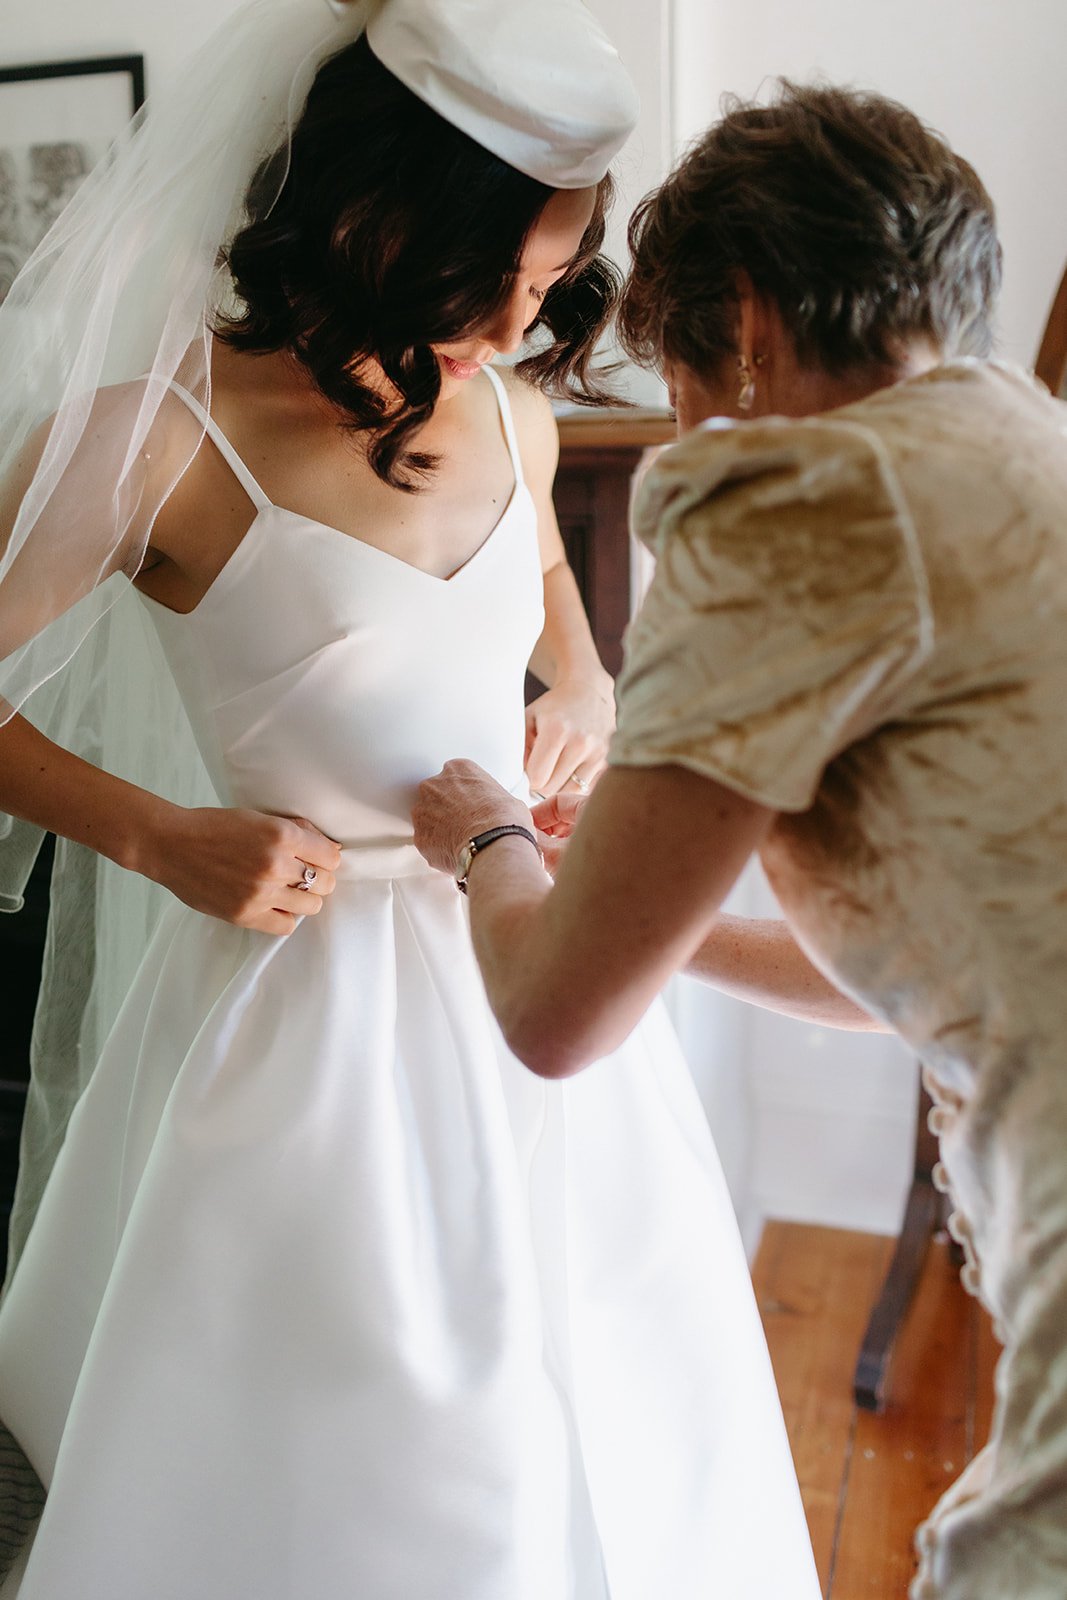 Beautiful bride Jill wore the Victor wedding dress and Christian overskirt by Halfpenny London